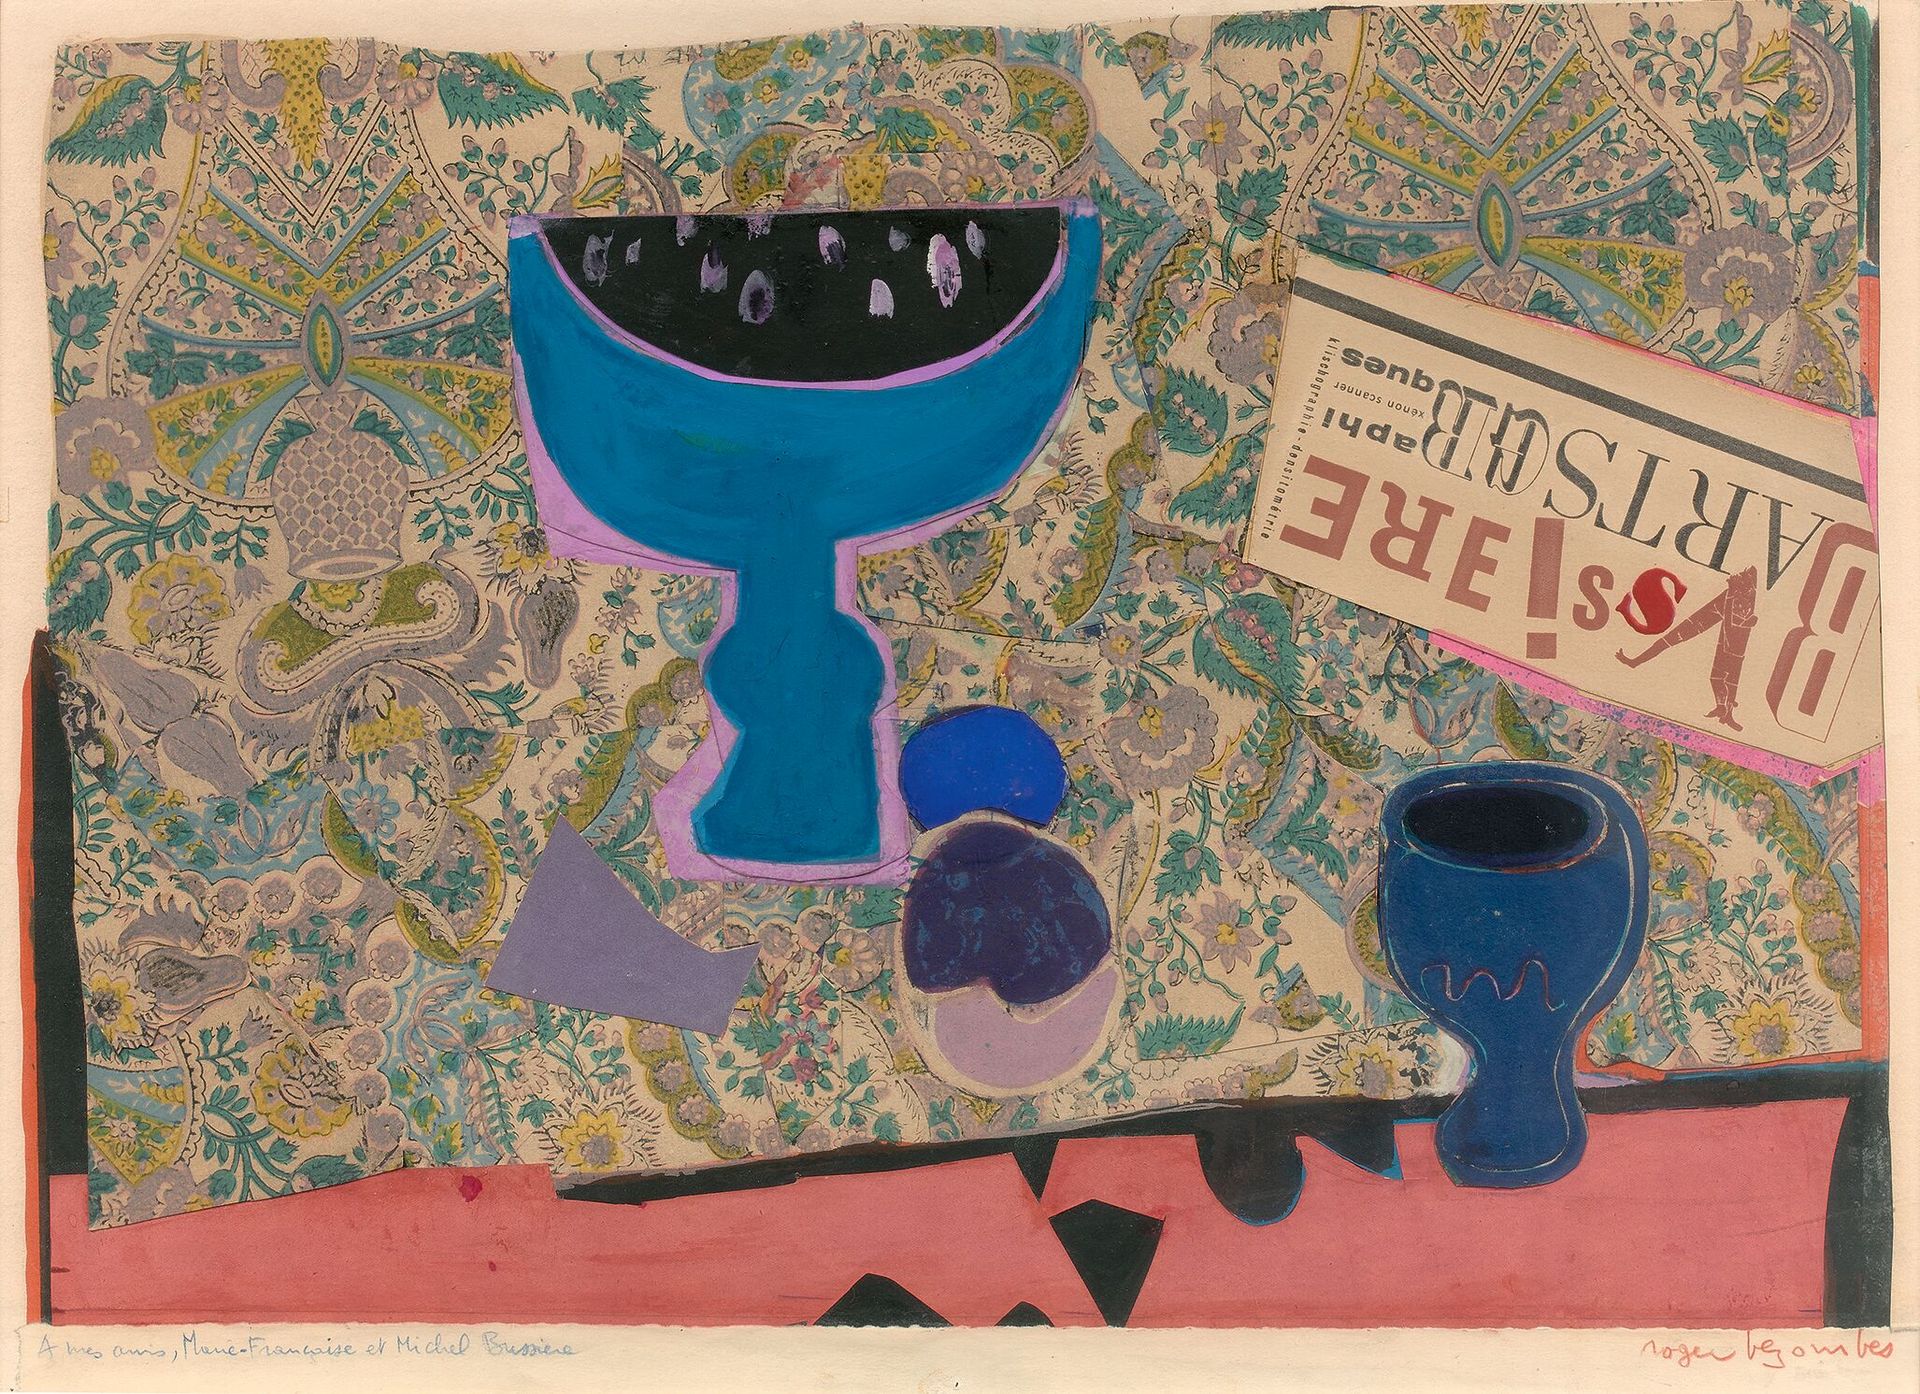 Null Roger BEZOMBES (1913-1994)
The blue cup
Mixed media, gouache, collage and p&hellip;